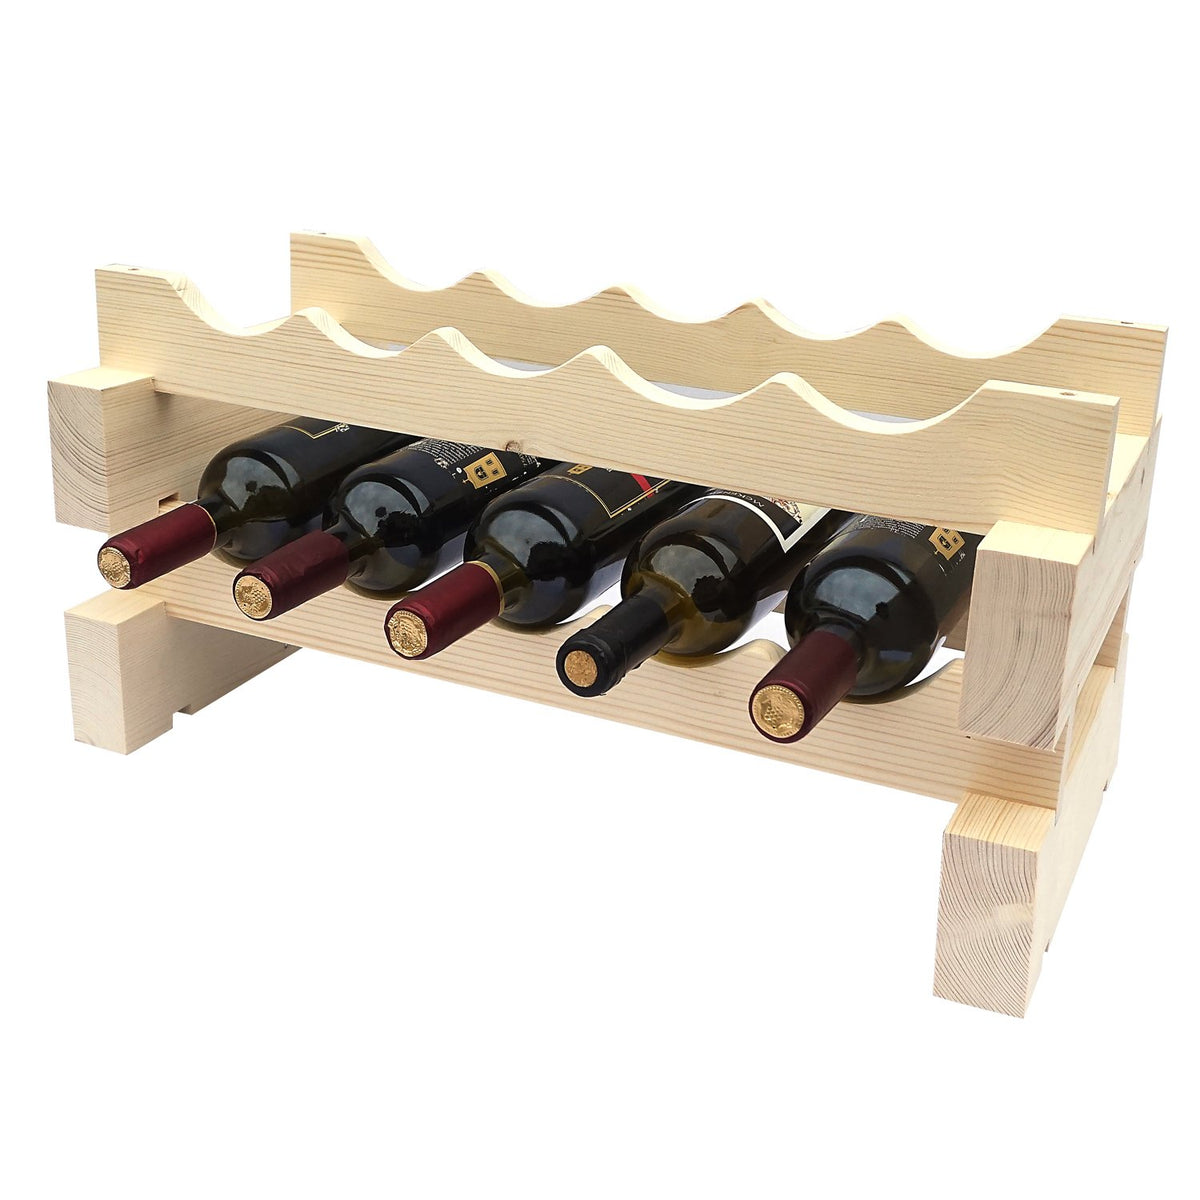 5 Bottle Modular Wine Rack - New Zealand Pine - With Bottles - Two Layers 